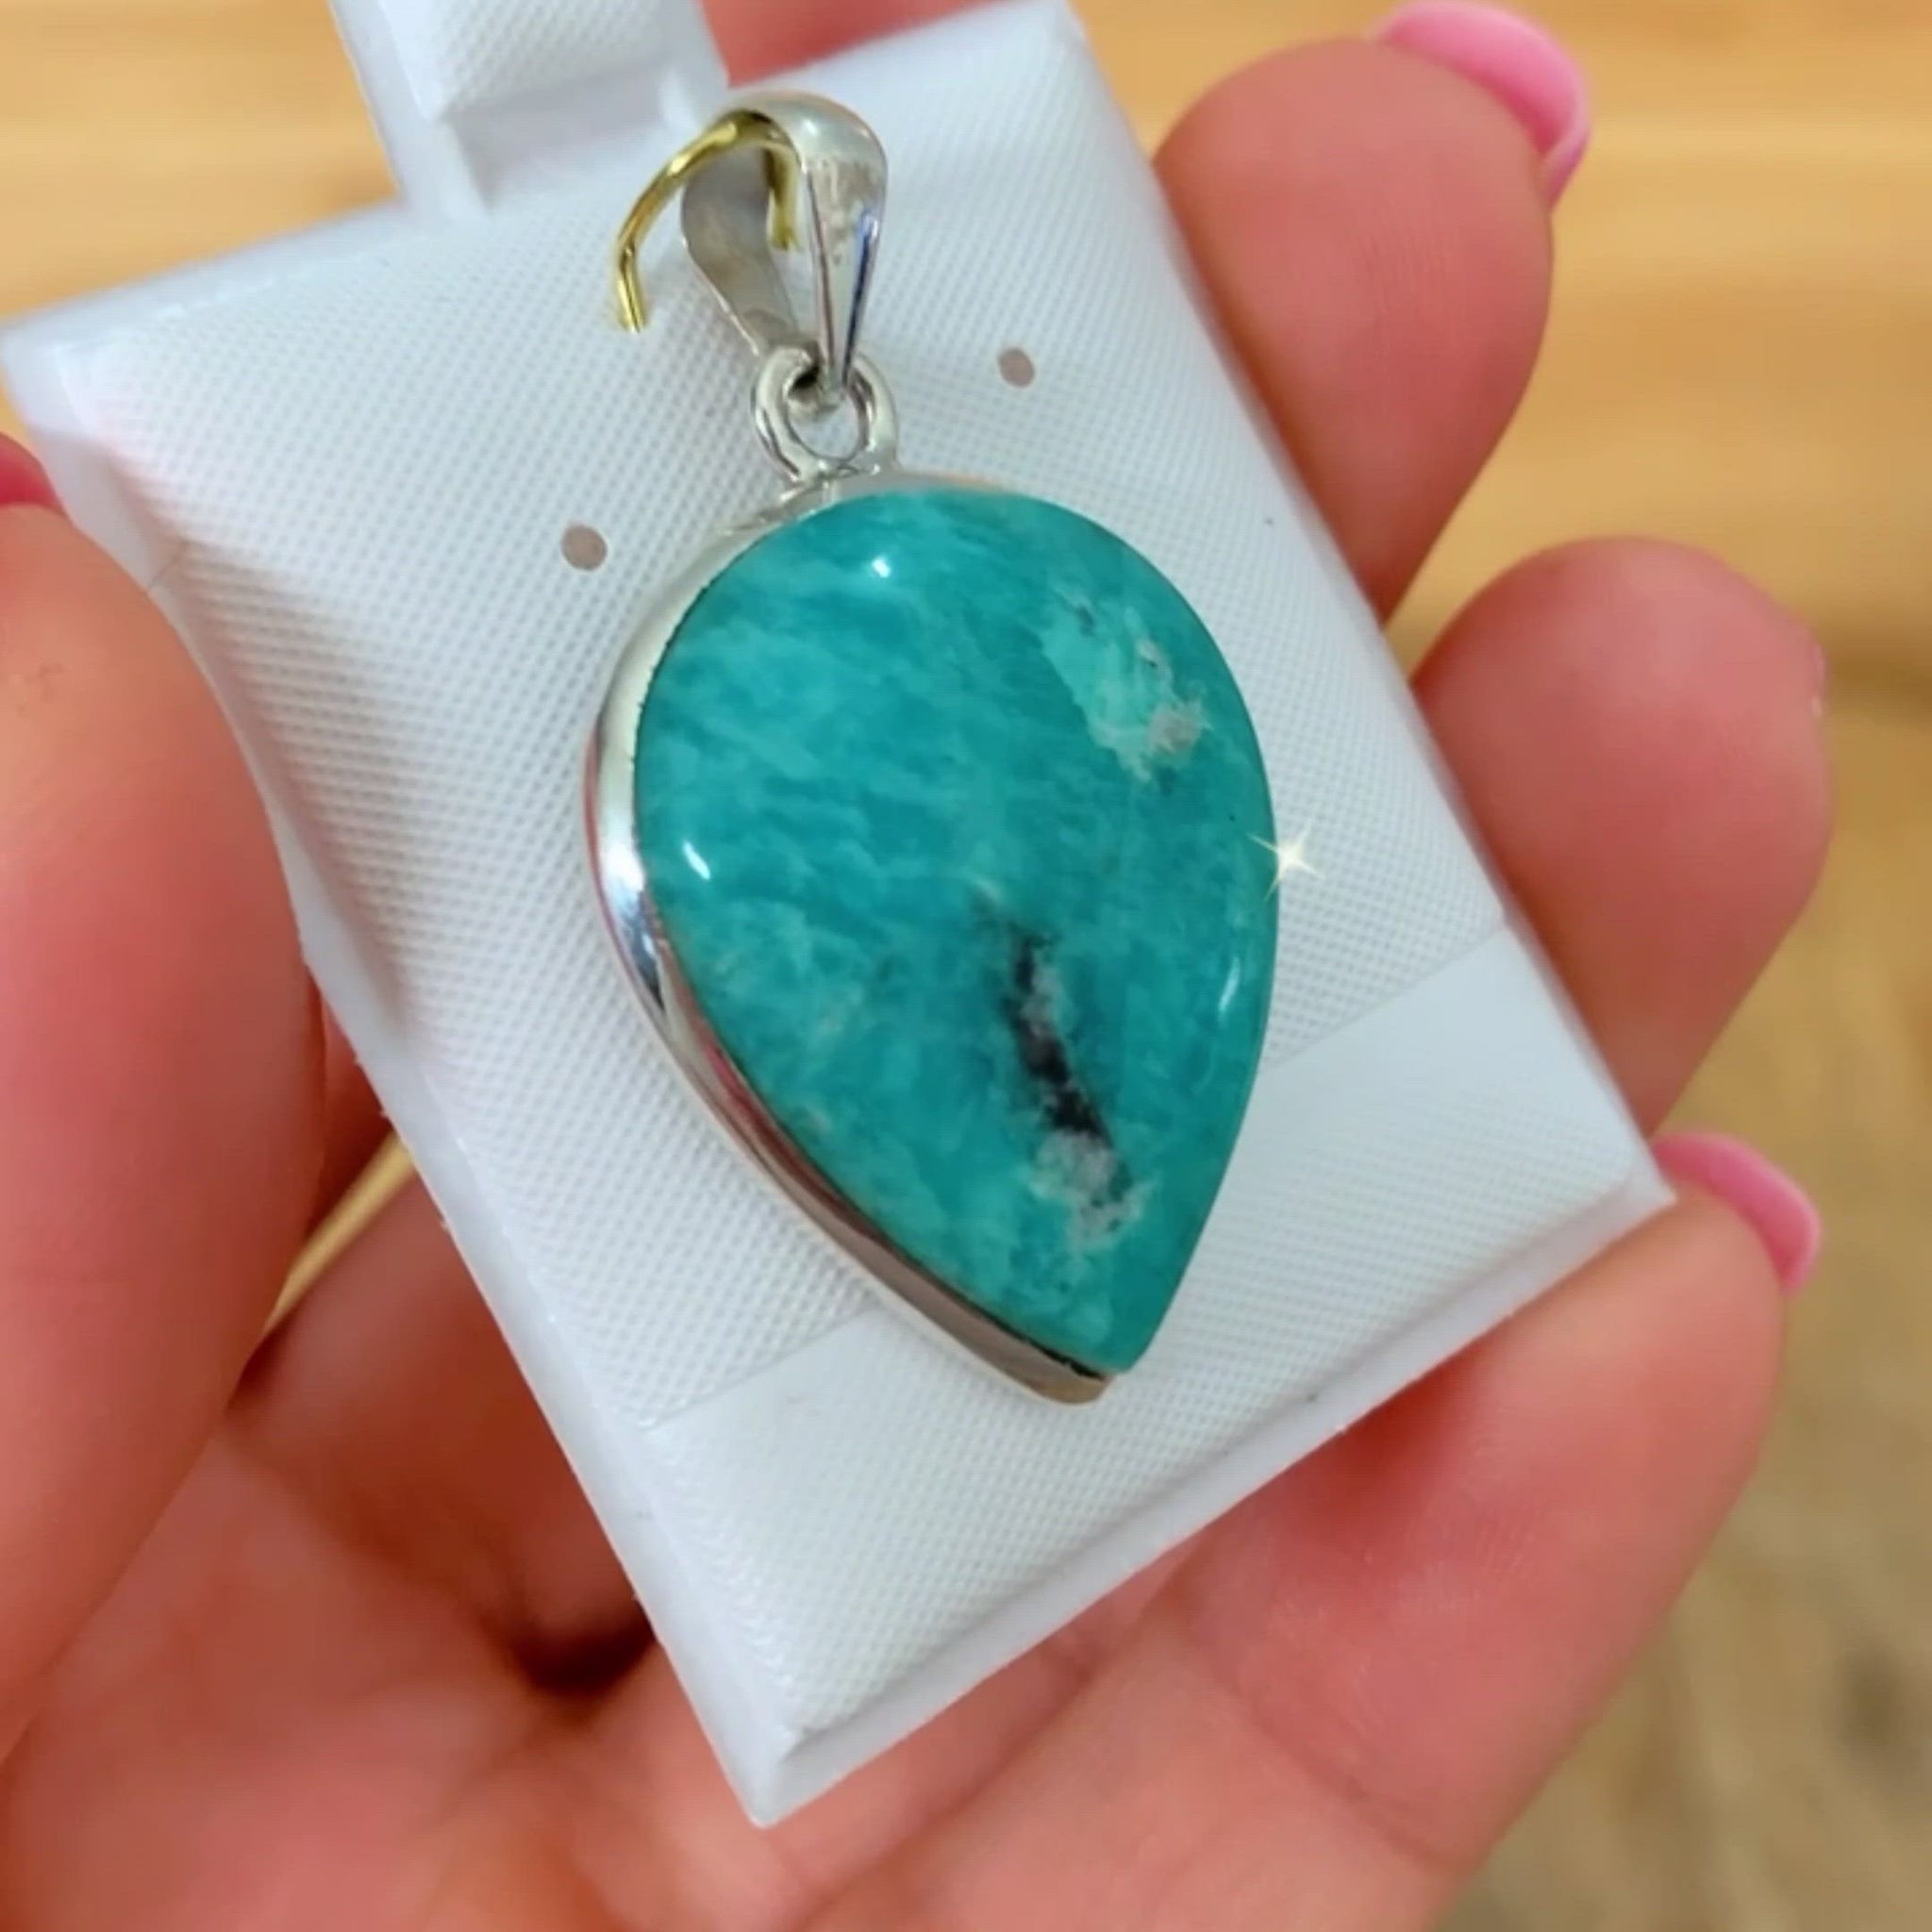 Looking for a Genuine Amazonite Necklace - E? Find Natural Amazonite Sterling Pendant Necklace, Amazonite Jewelry when you shop at Magic Crystals. Natural Amazonite Crystal Healing Pendant Necklace.Called the Stone of Courage, the Stone of Truth. Amazonite Pendant in Silver - Amazonite crystal point pendant